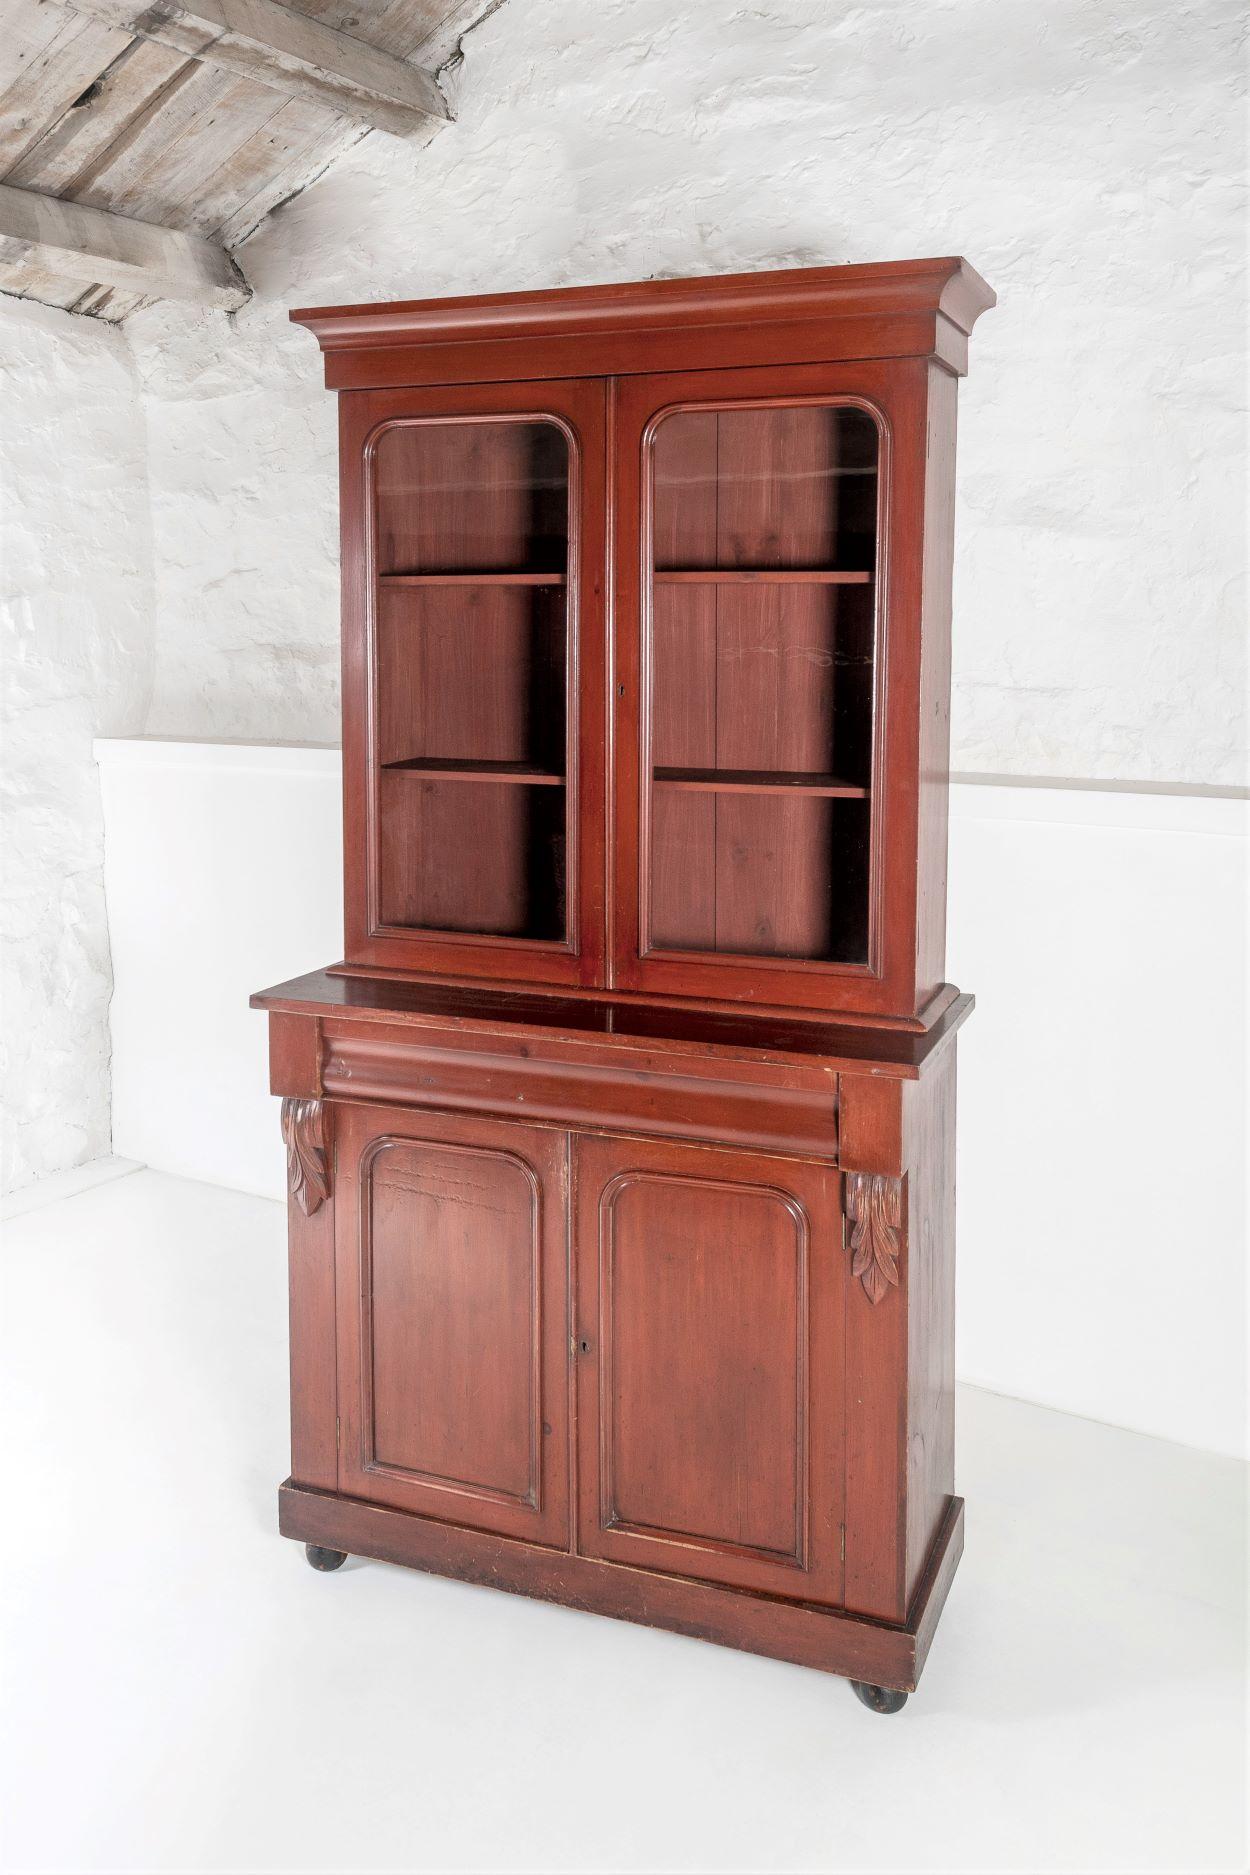 A characterful tall Victorian dresser unit boasting its original glazing and beautiful red brown lacquer.  An original piece is very good order, featuring some nice detailing.
The moulded ogee cornice gives the piece a good balance and height, the